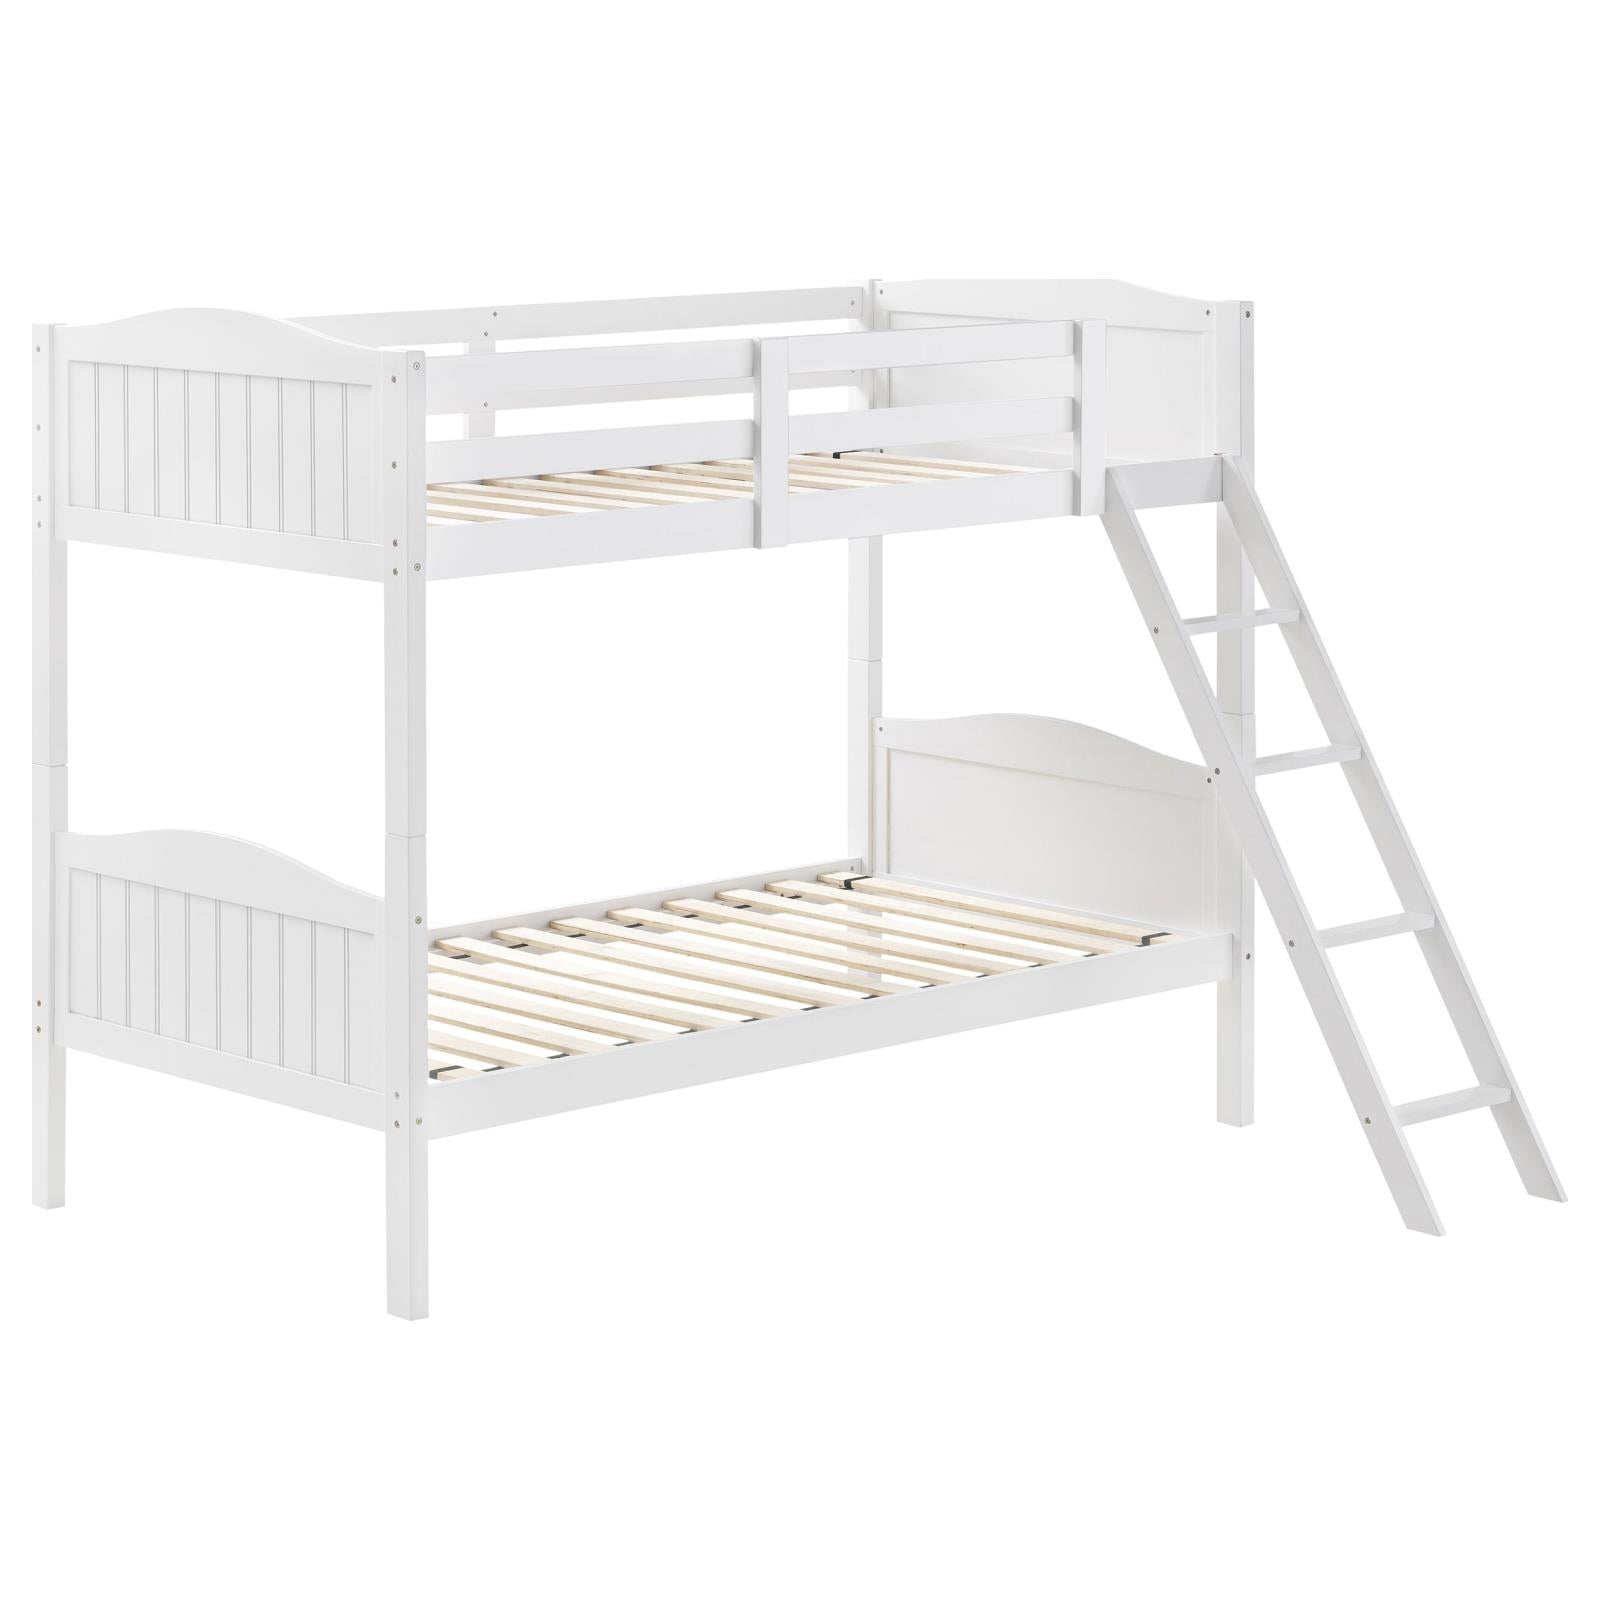 405053WHT TWIN/TWIN BUNK BED image